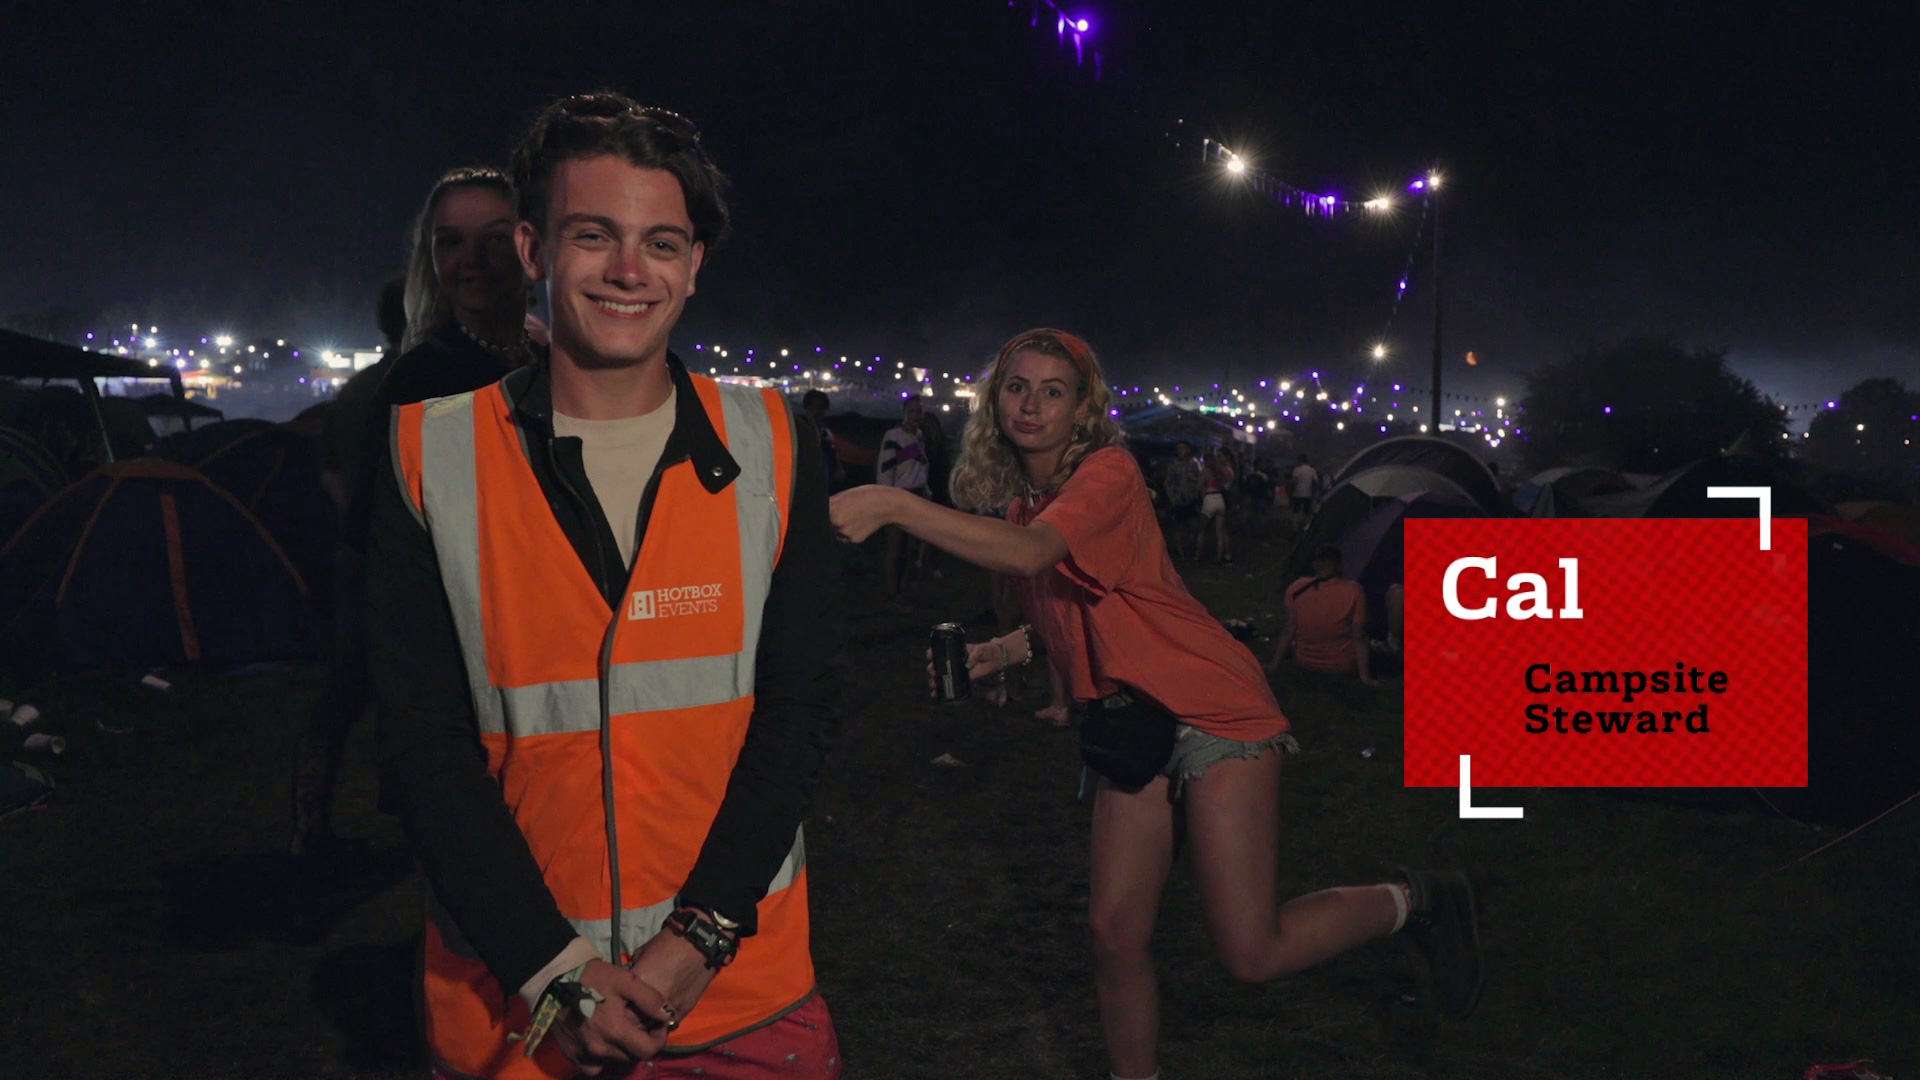 Cal a Campsite Steward volunteering with Hotbox Events at Leeds Festival!